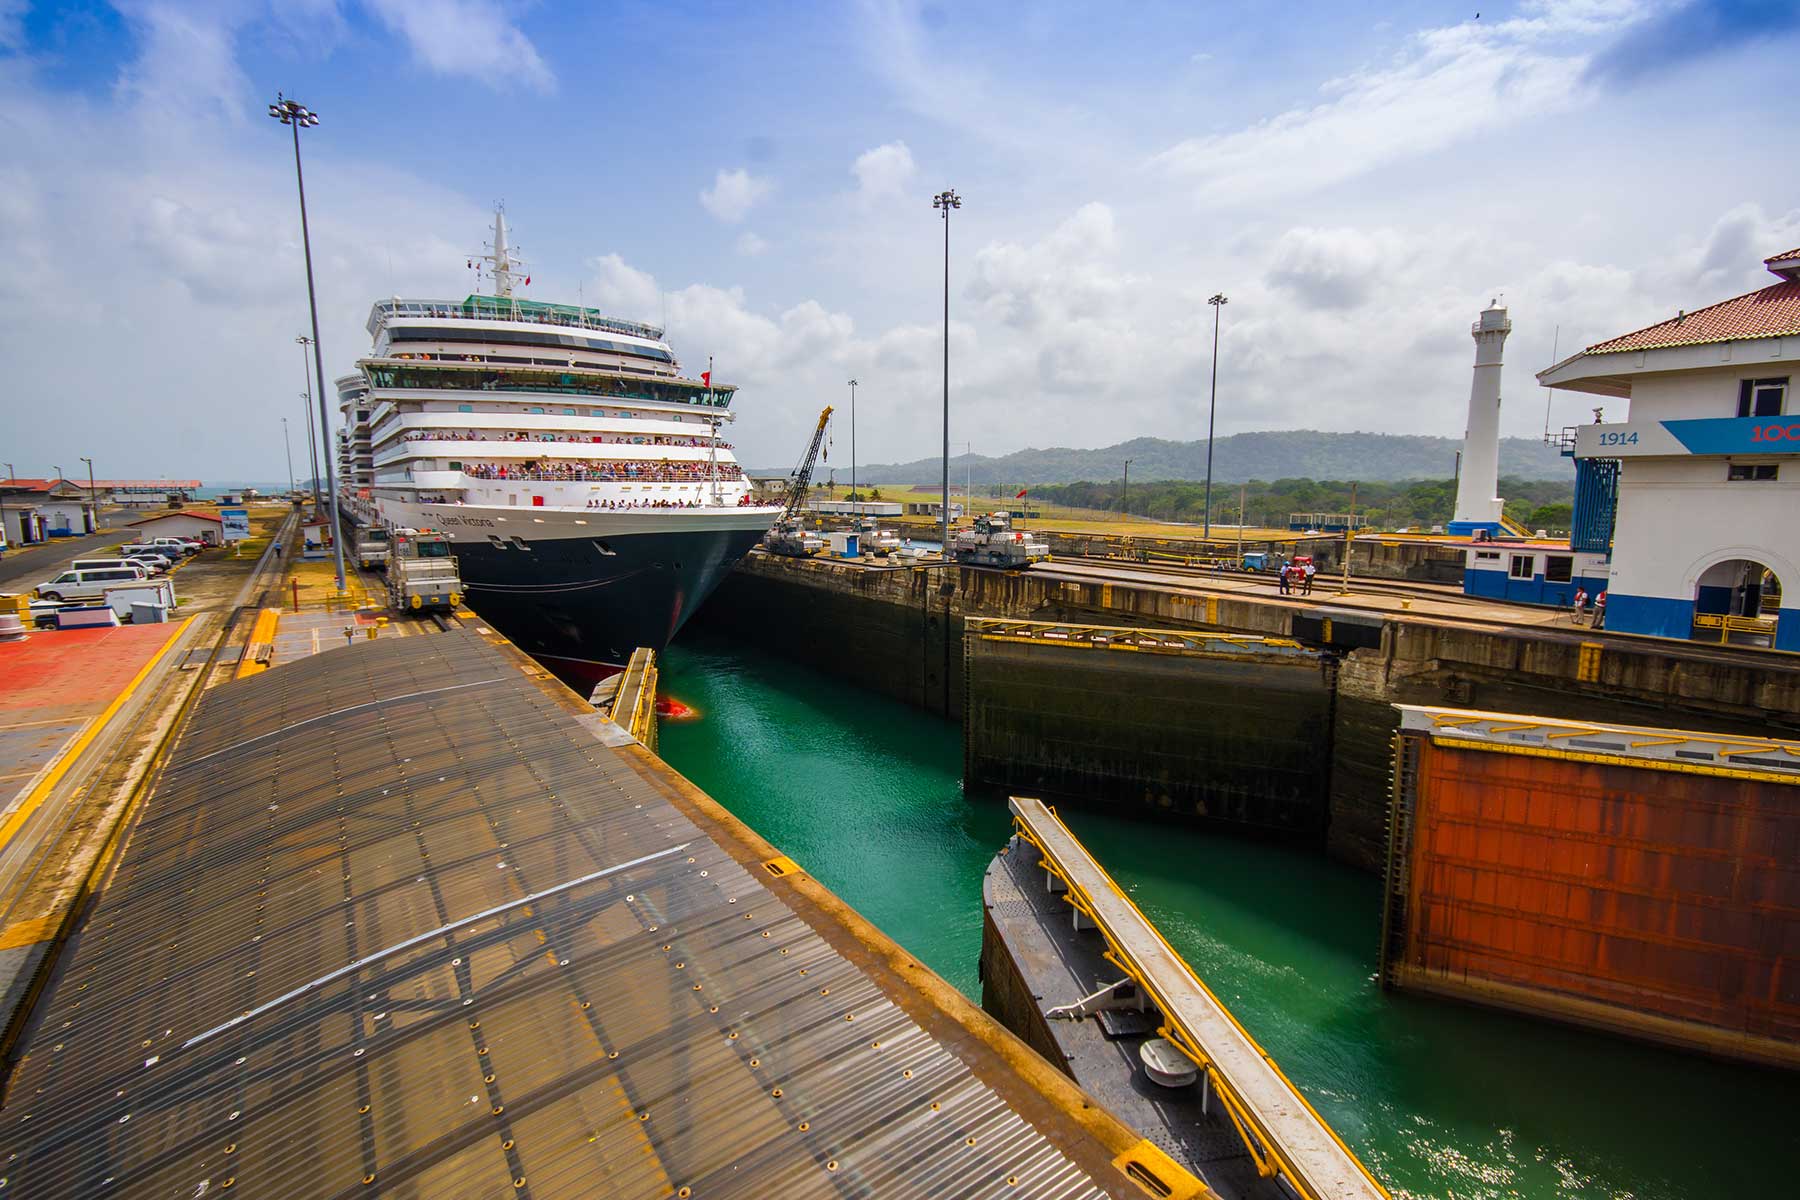 Cunard's Queen Victoria entering the Panama Canal from the Atlantic (Image: Fotos593/Shutterstock)